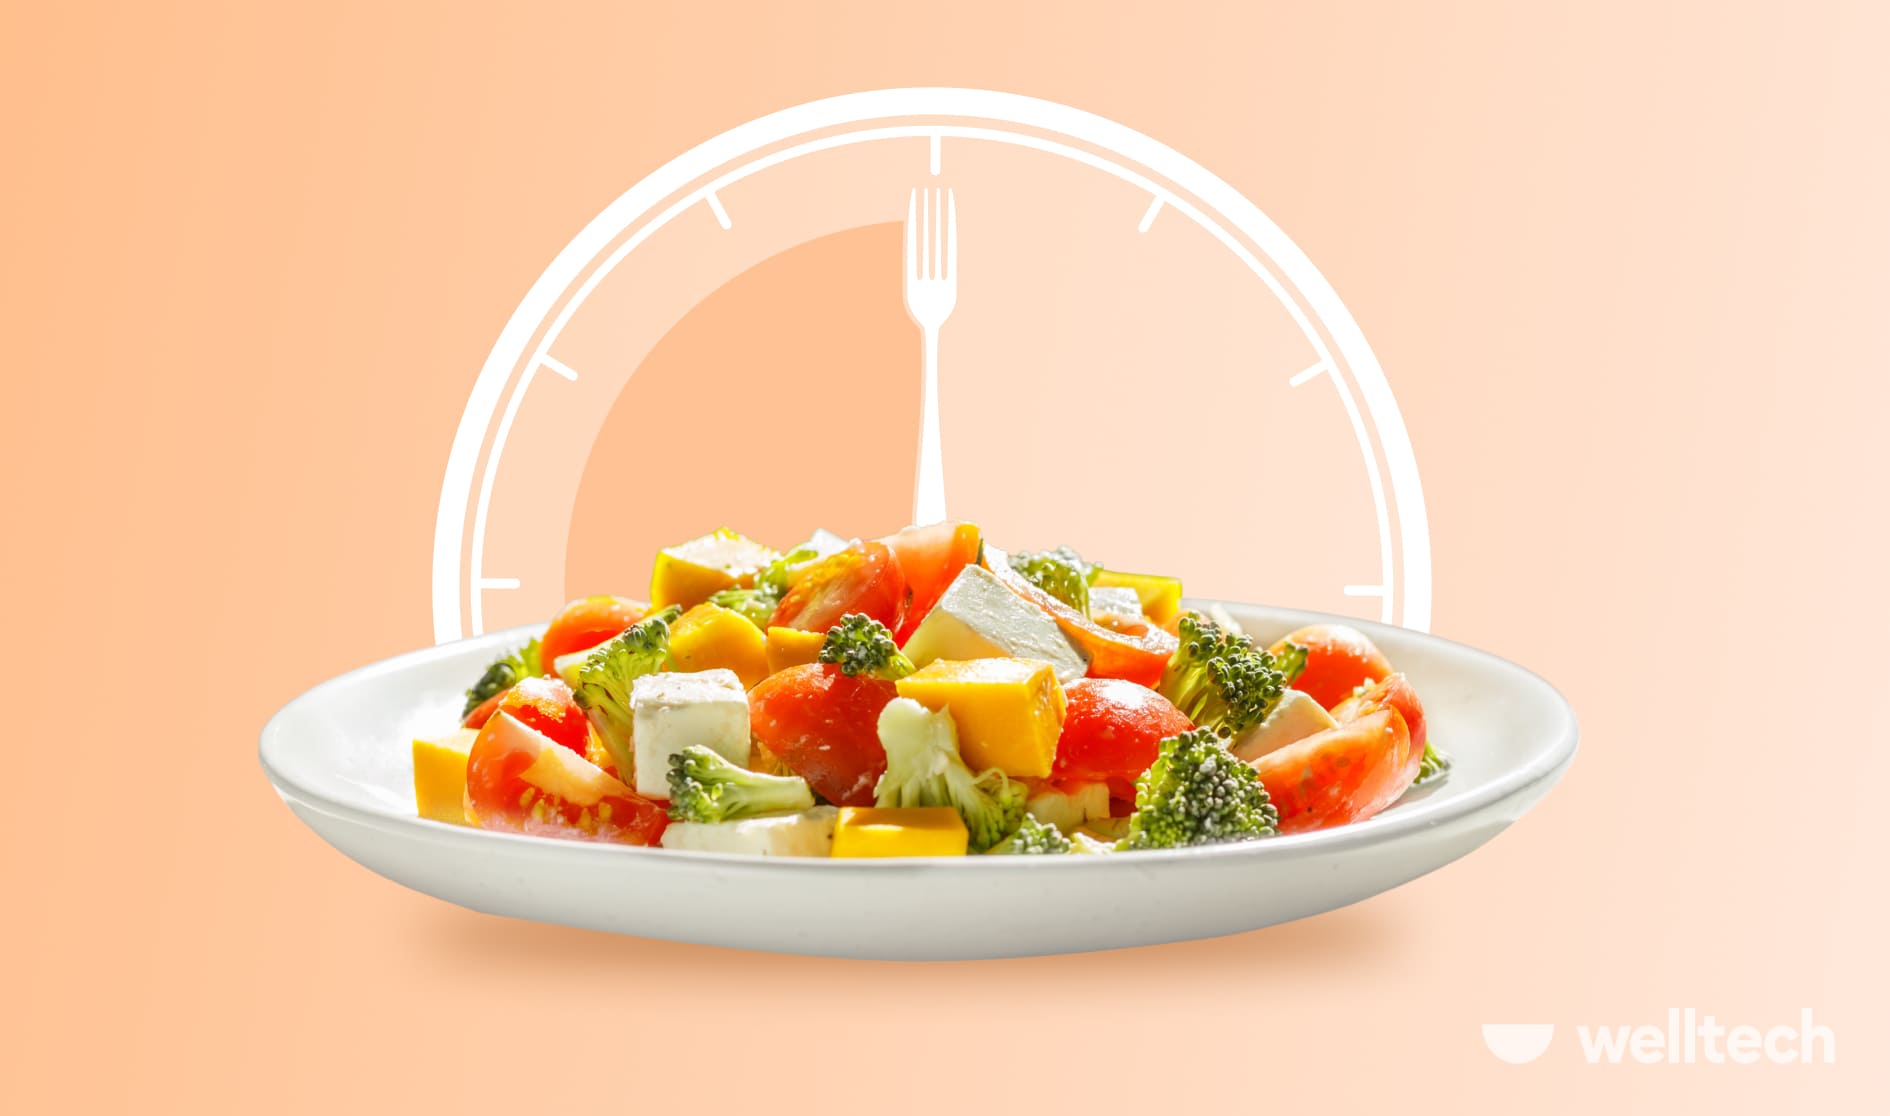 a plate with a salad with a clock on the background_intermittent fasting 20:4